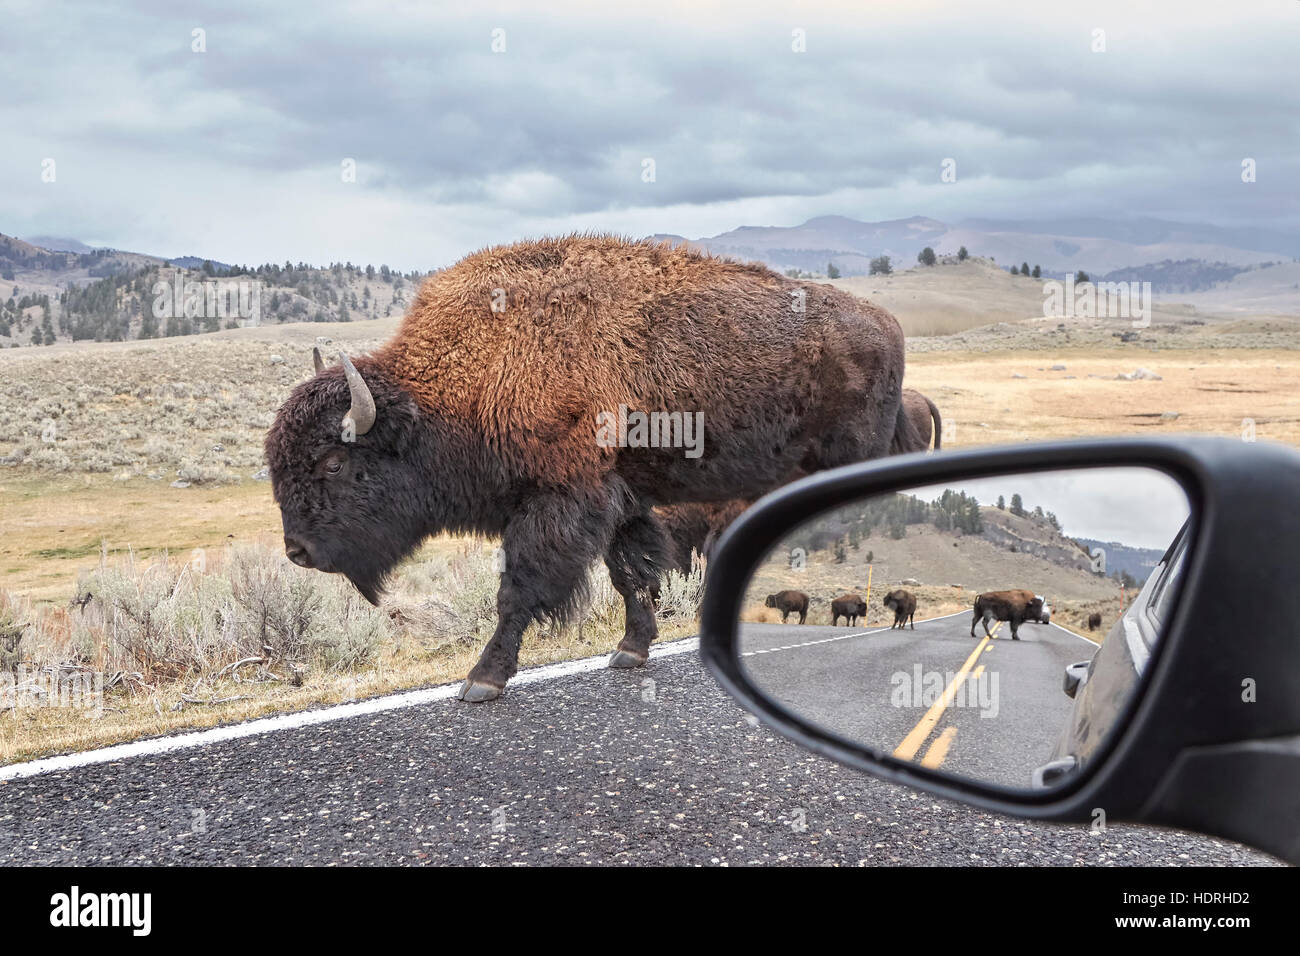 American bison (Bison bison) on a road seen from car driver seat with view in wing mirror, Grand Teton National Park, Wyoming, USA. Stock Photo